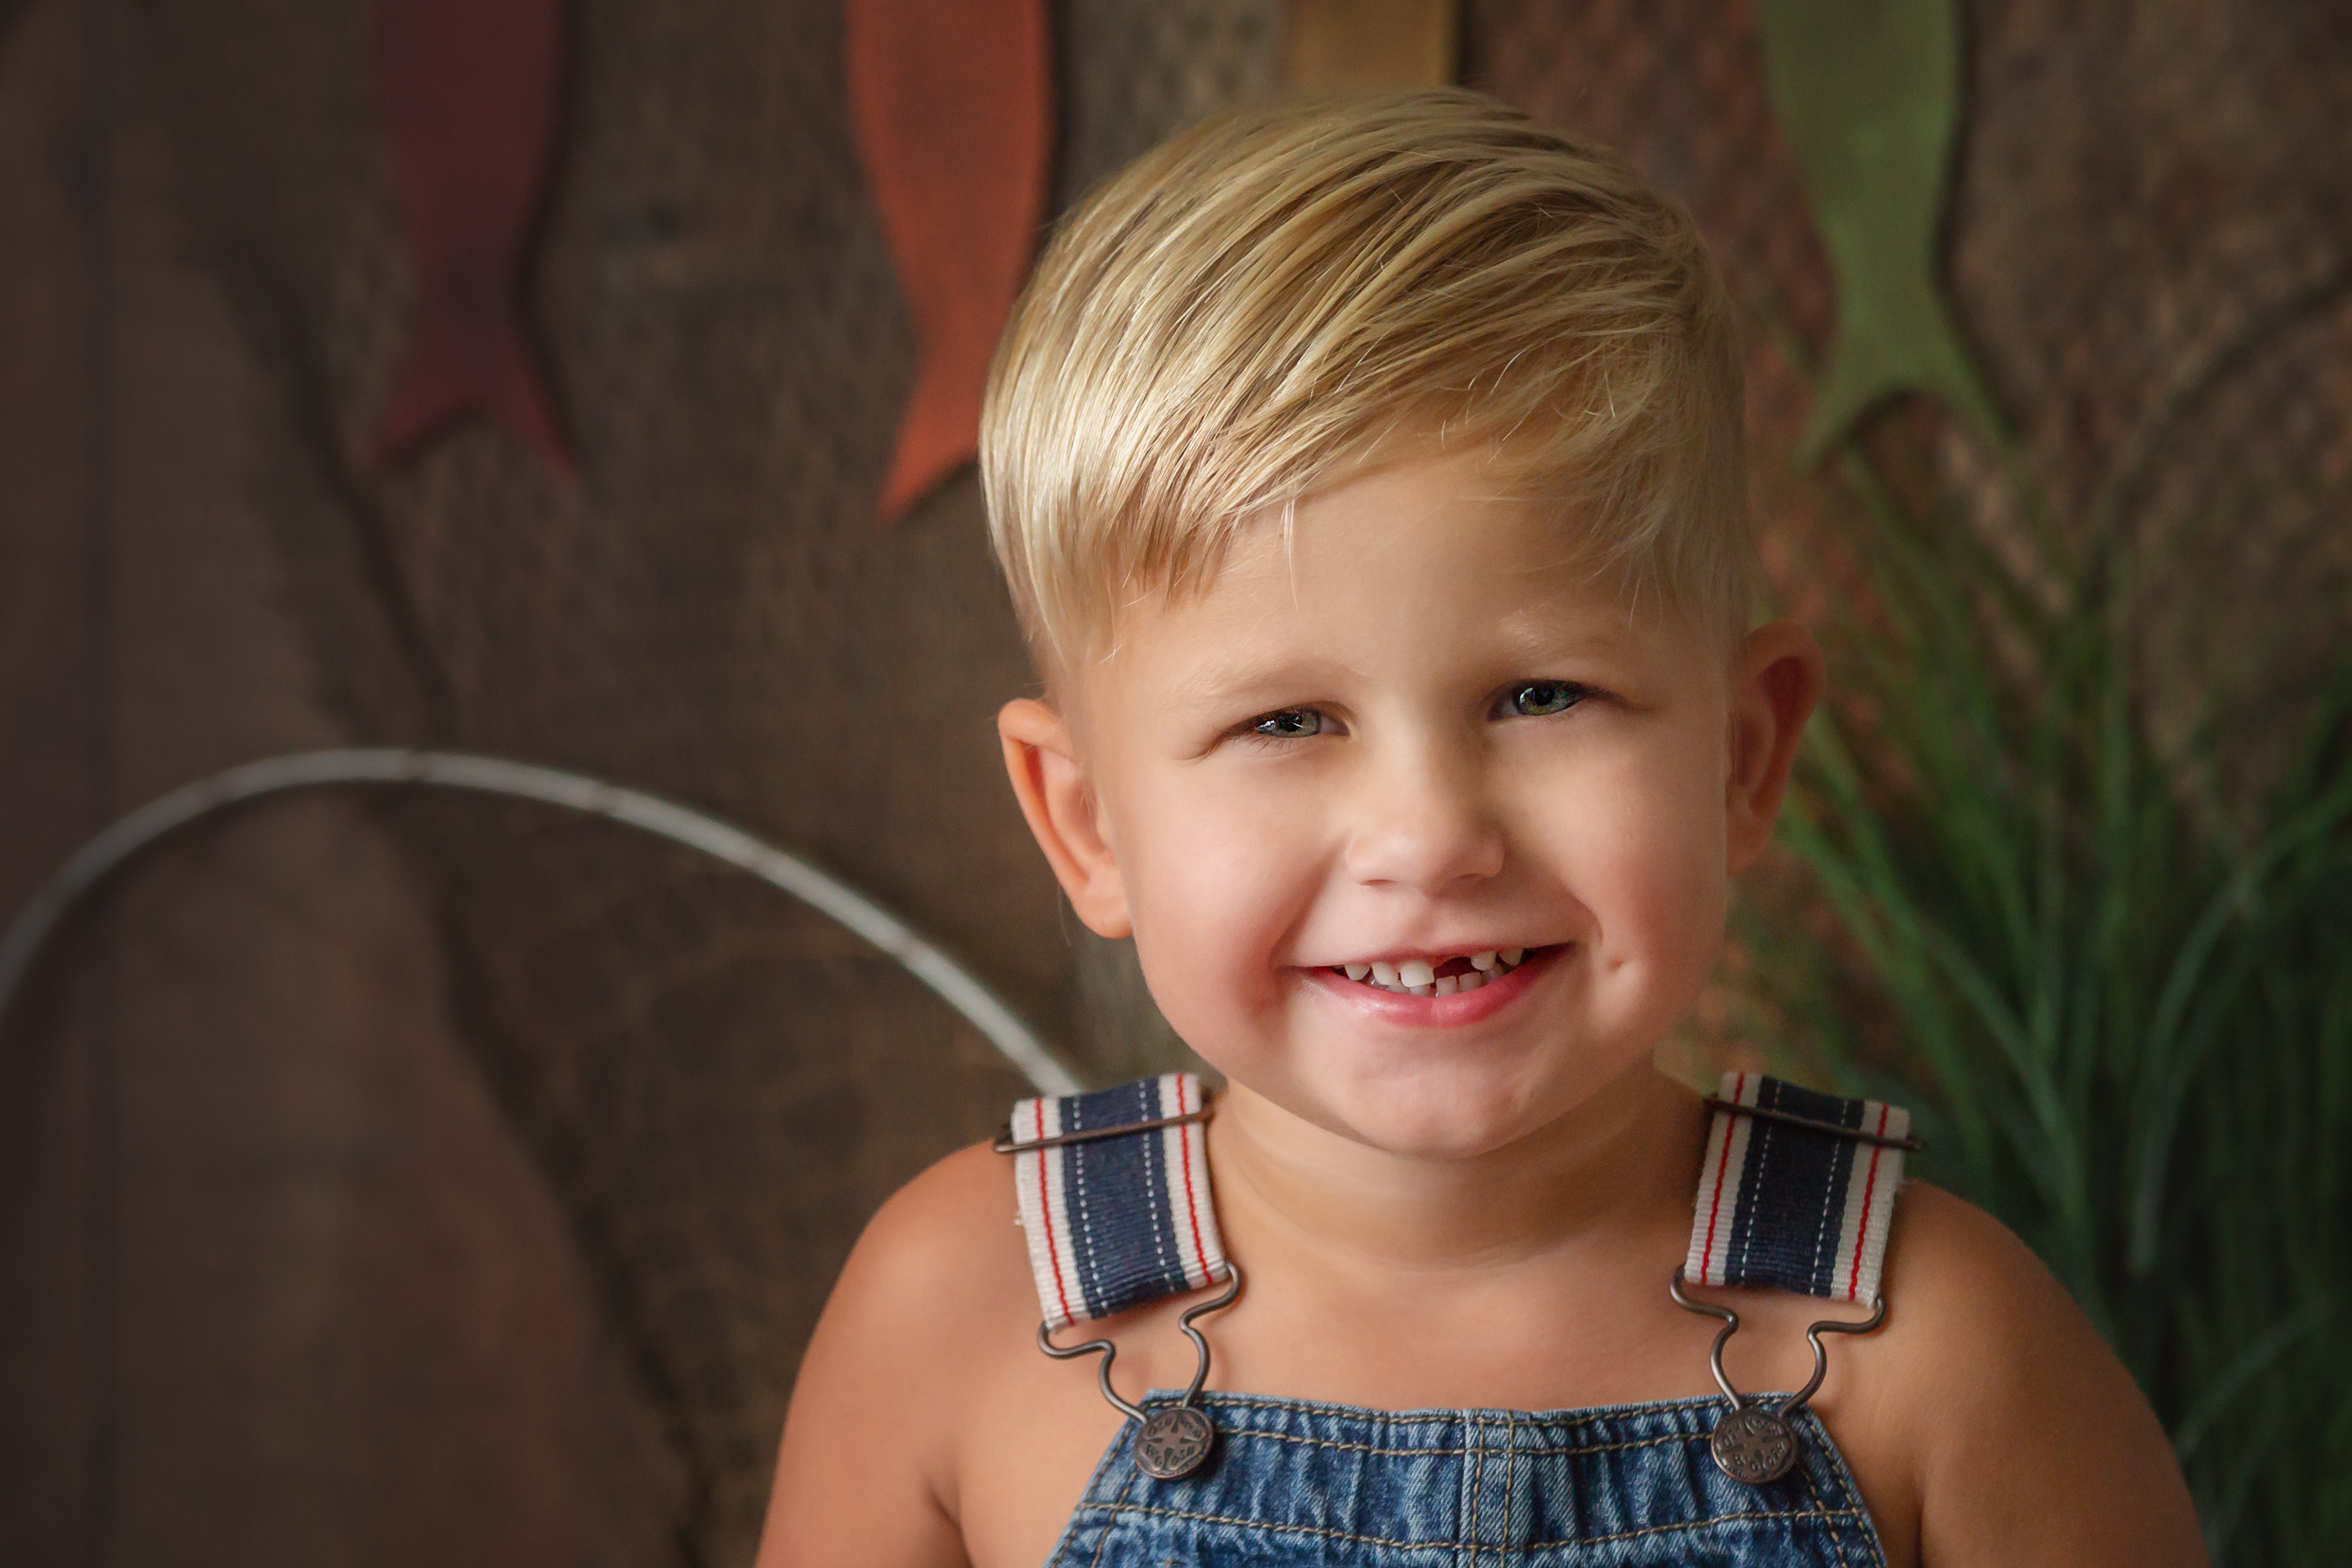 Fishing Mini Session, Mini Session, Minis, Fishing Minis, boys, Studio Mini Session, Watch Me Grow, Baby, Child, Photography, Session, Casi Ann Photography, studio, 3 year, overalls, vines, fish, Ingleside, Rockford, Illinois, portrait, kids, 3 years